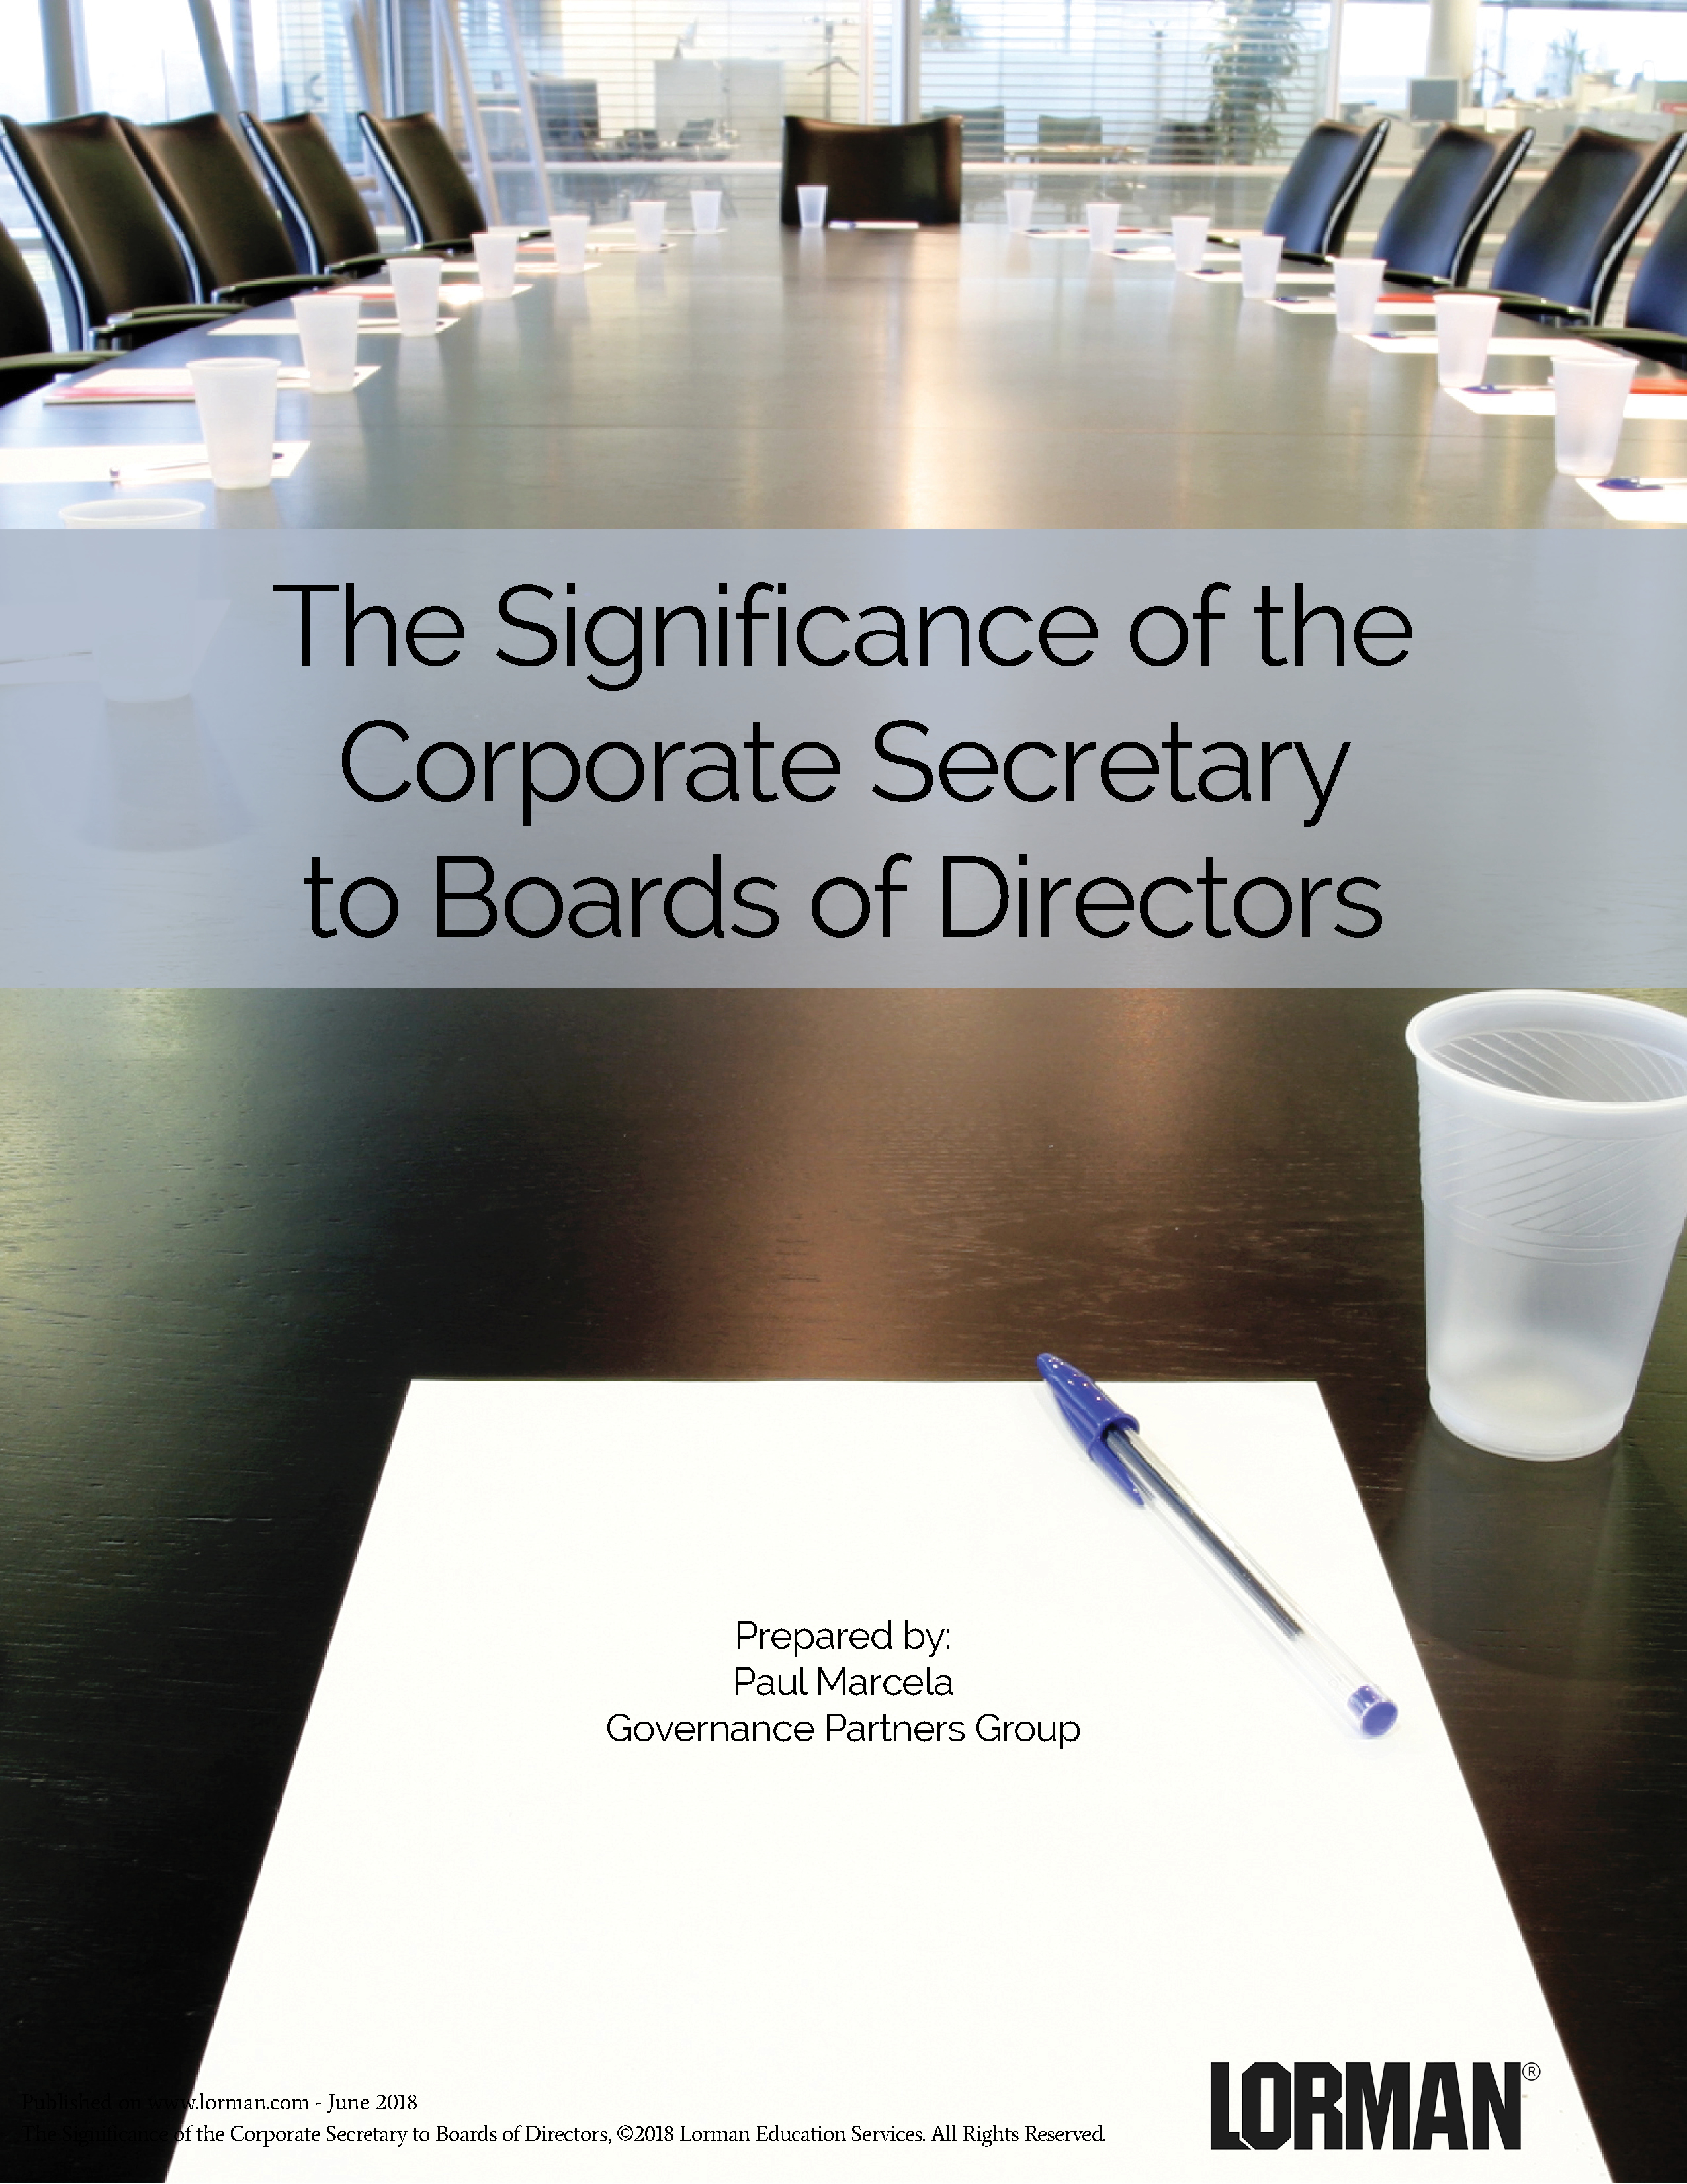 The Significance of the Corporate Secretary to Boards of Directors